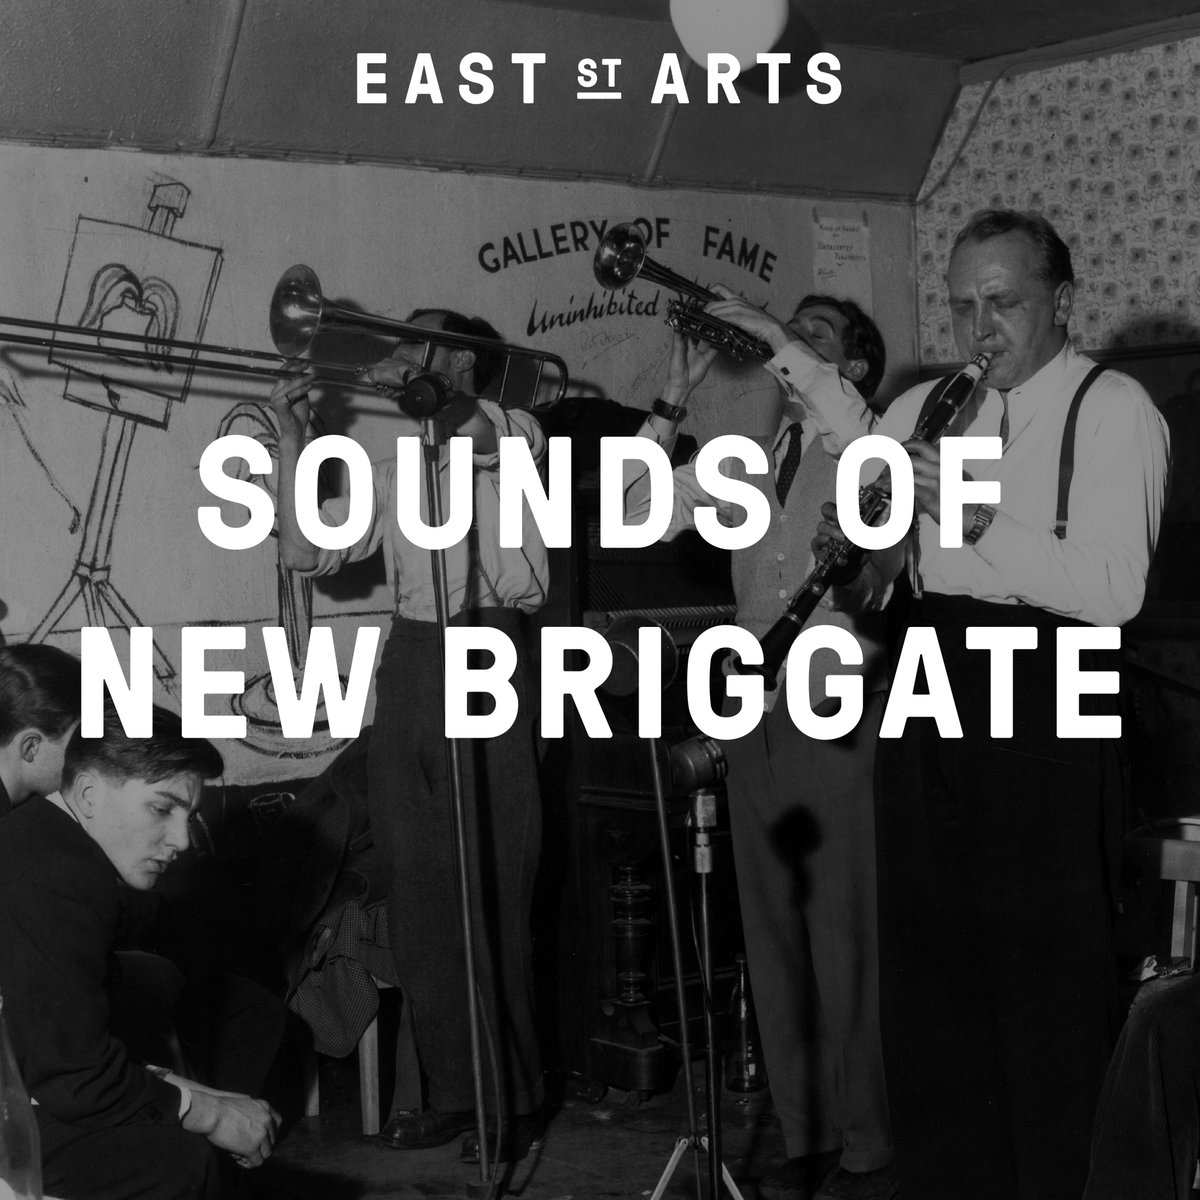 🎉 Find out more about the history of jazz and its role in the artistic and cultural development of Leeds with John Toolan from Chapel FM and Steve Crocker from Jazz Leeds in the next instalment of Sounds of New Briggate. Listen here: eaststreetarts.org.uk/.../listen-to-…